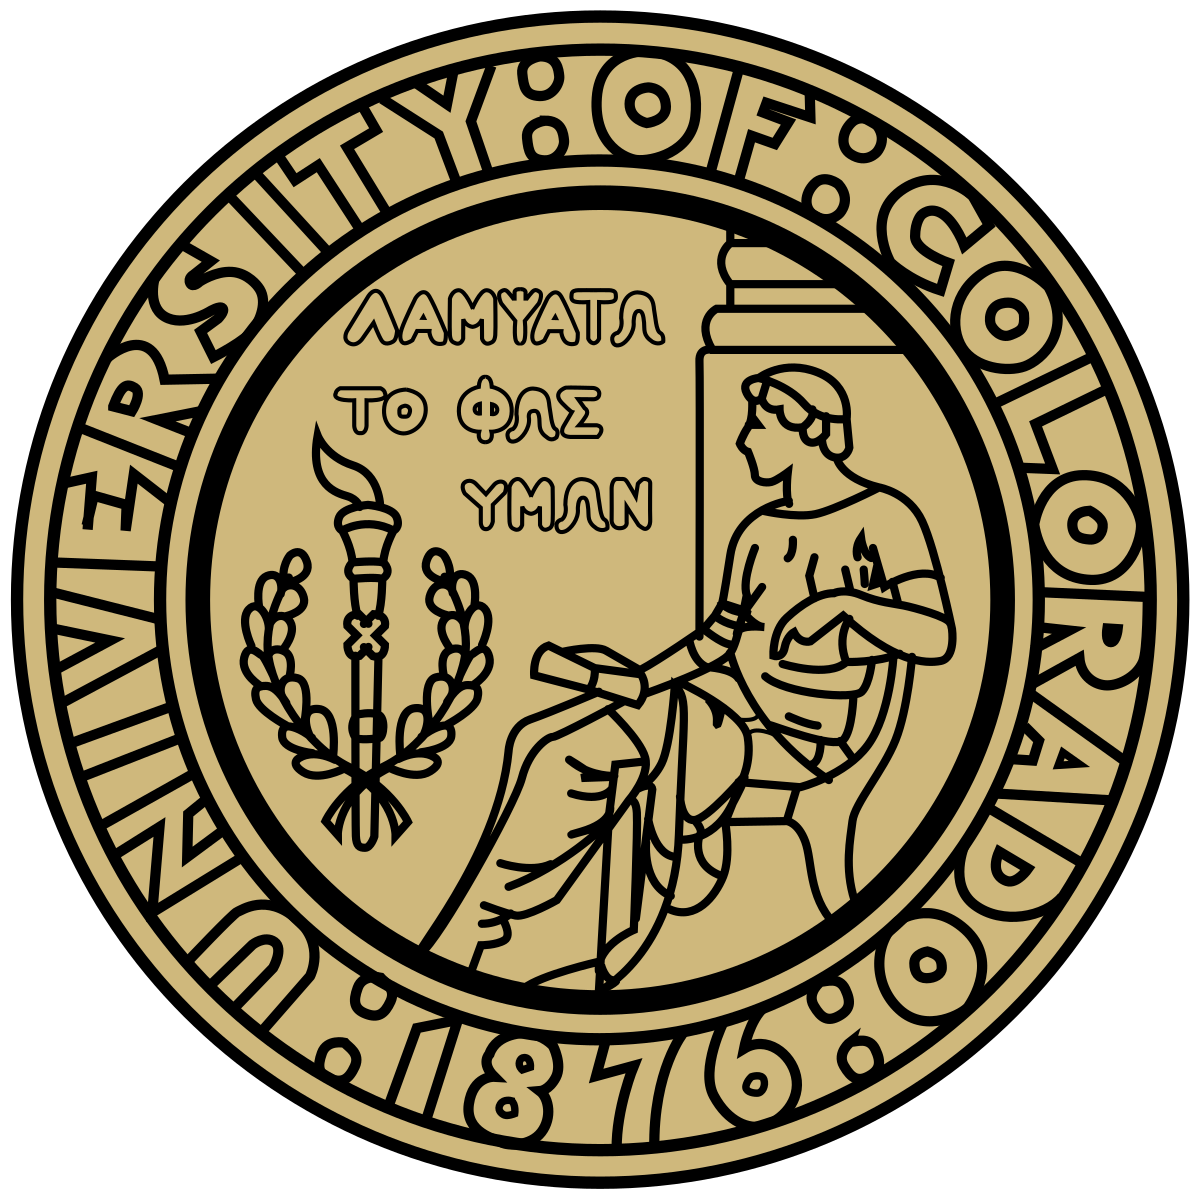 Logo of University of Colorado for our school profile